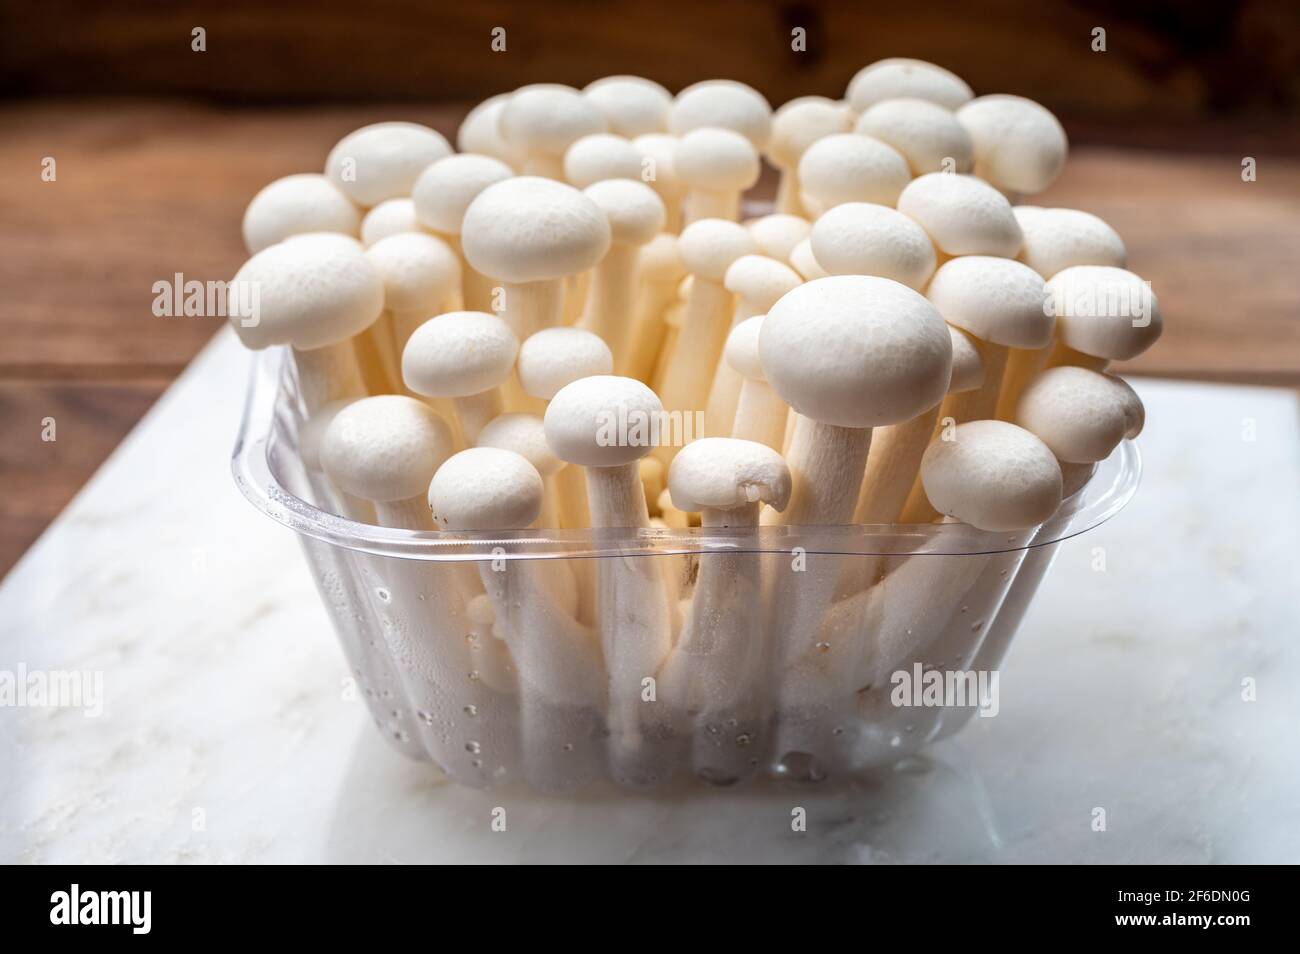 White and brown shimeji edible mushrooms native to East Asia, buna-shimeji is widely cultivated and rich in umami tasting compounds Stock Photo